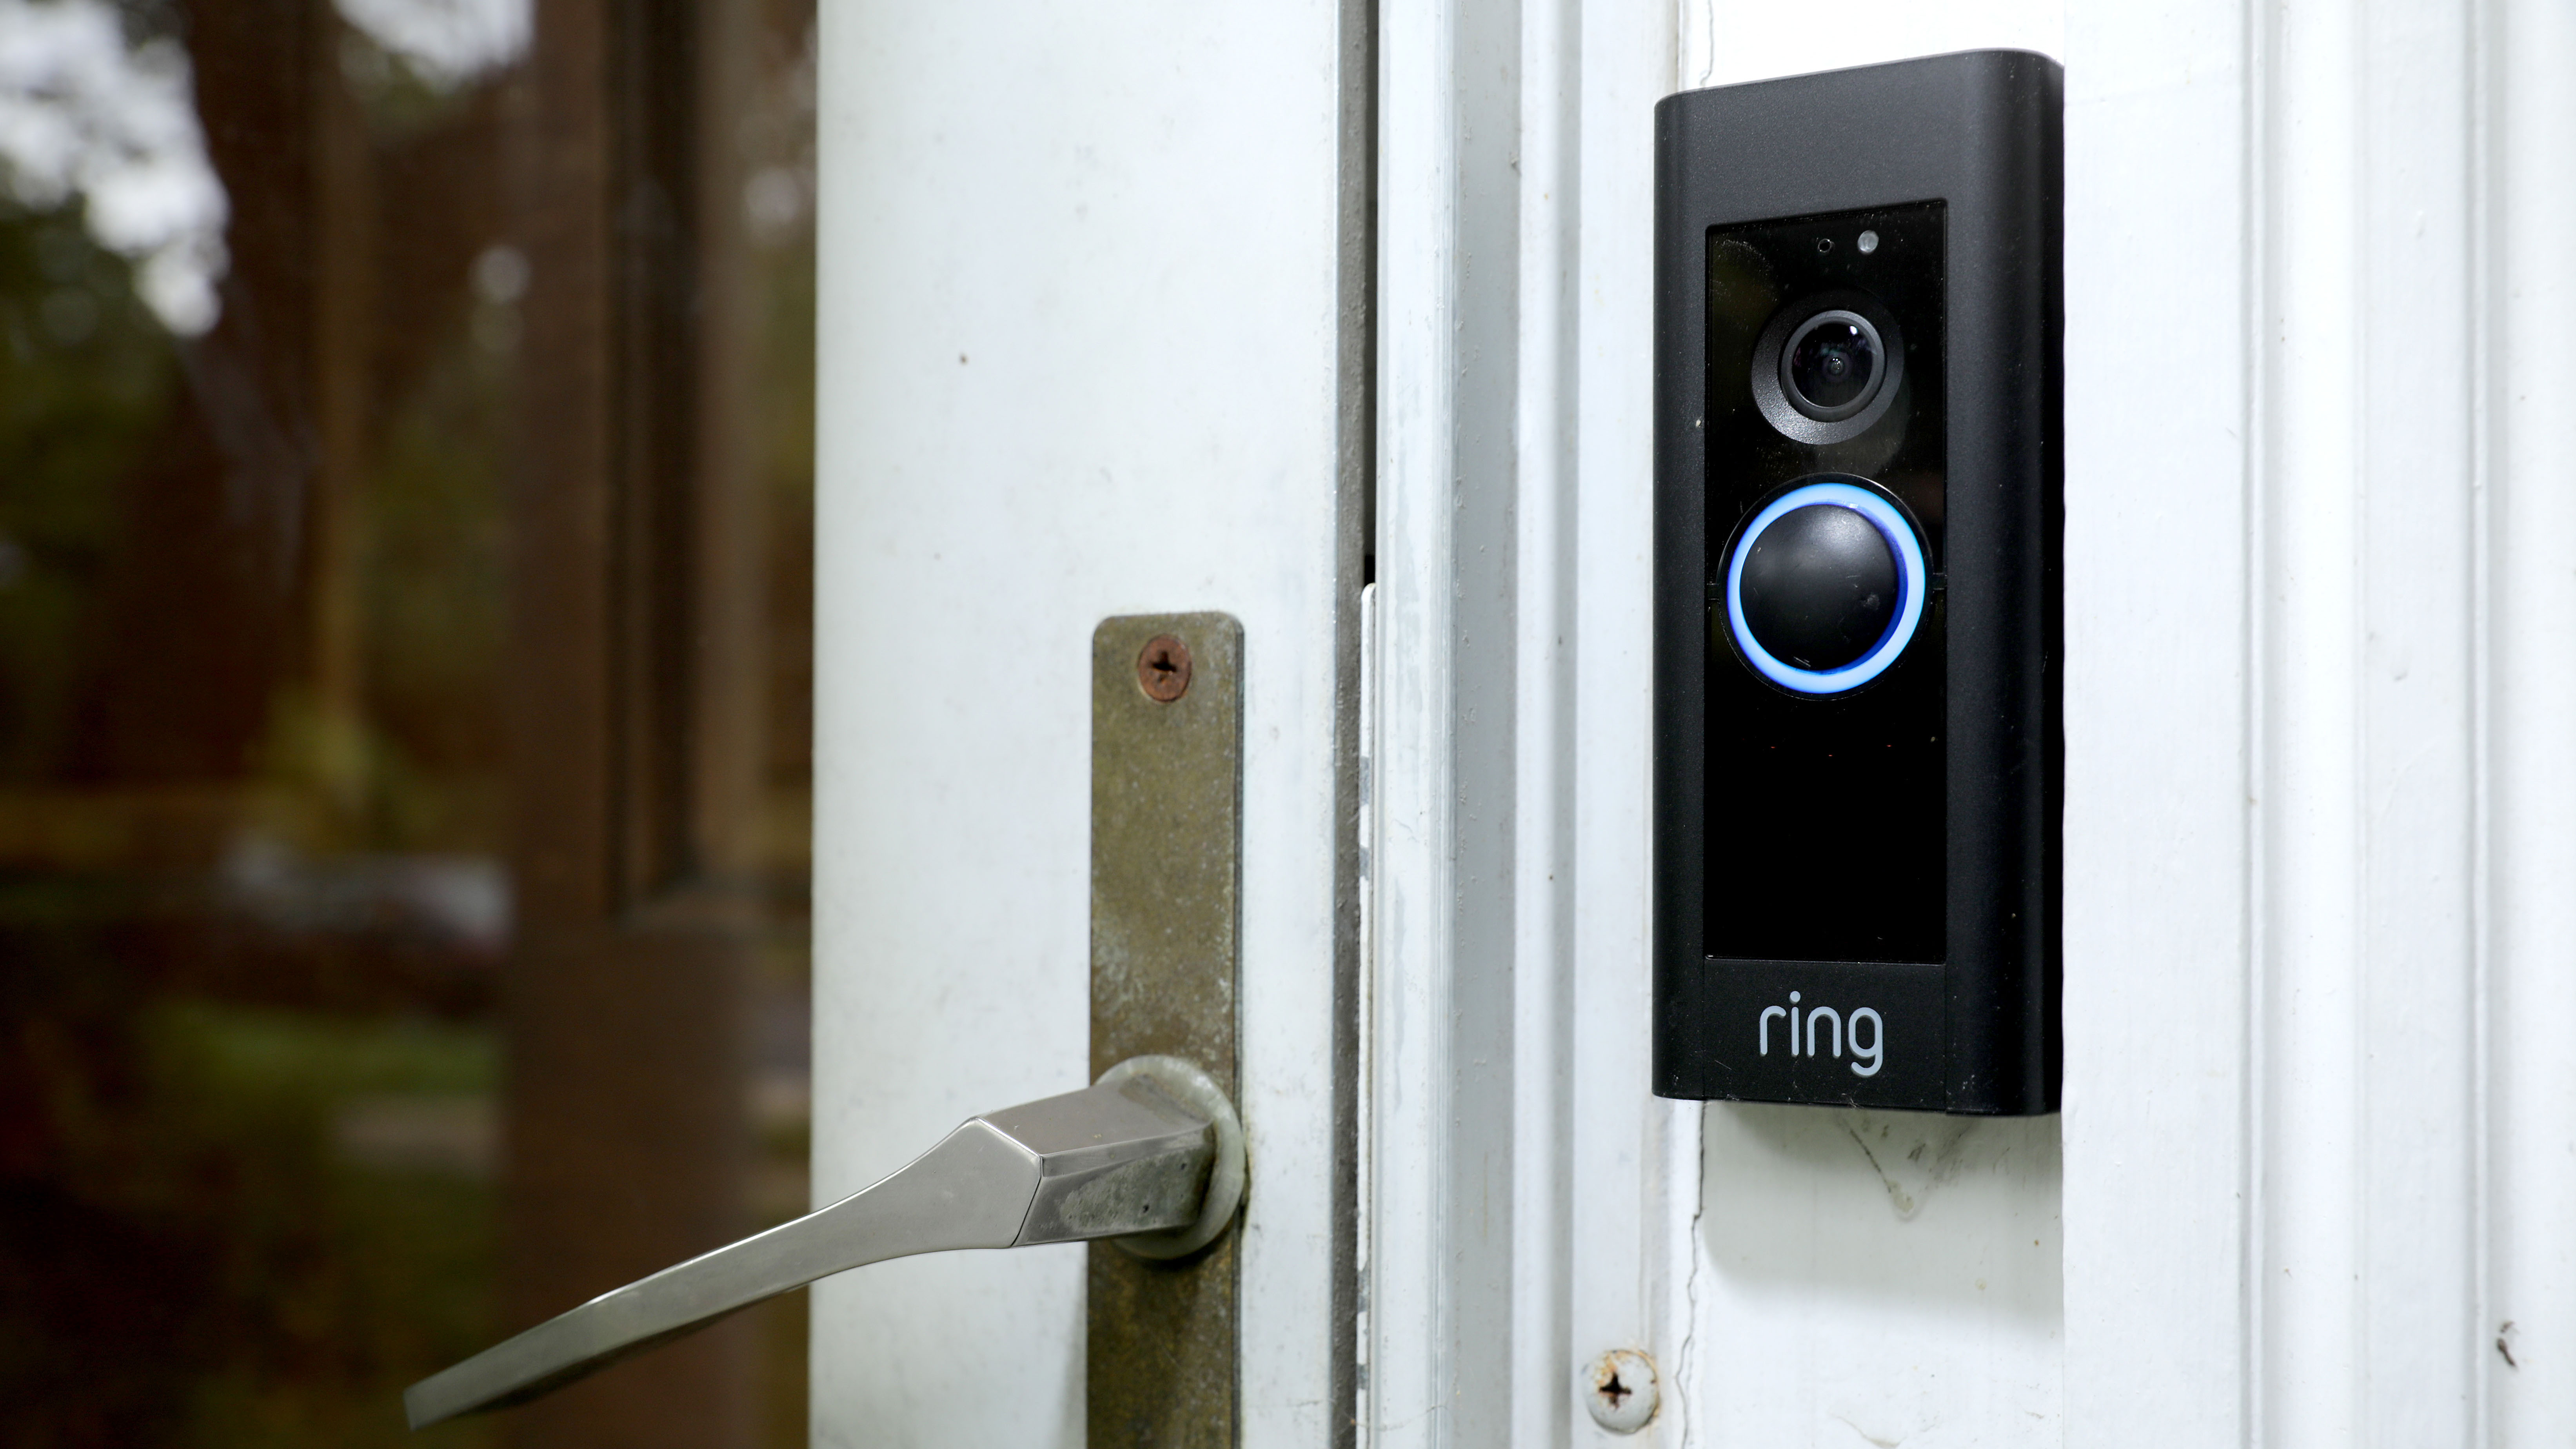 where can i buy a ring doorbell